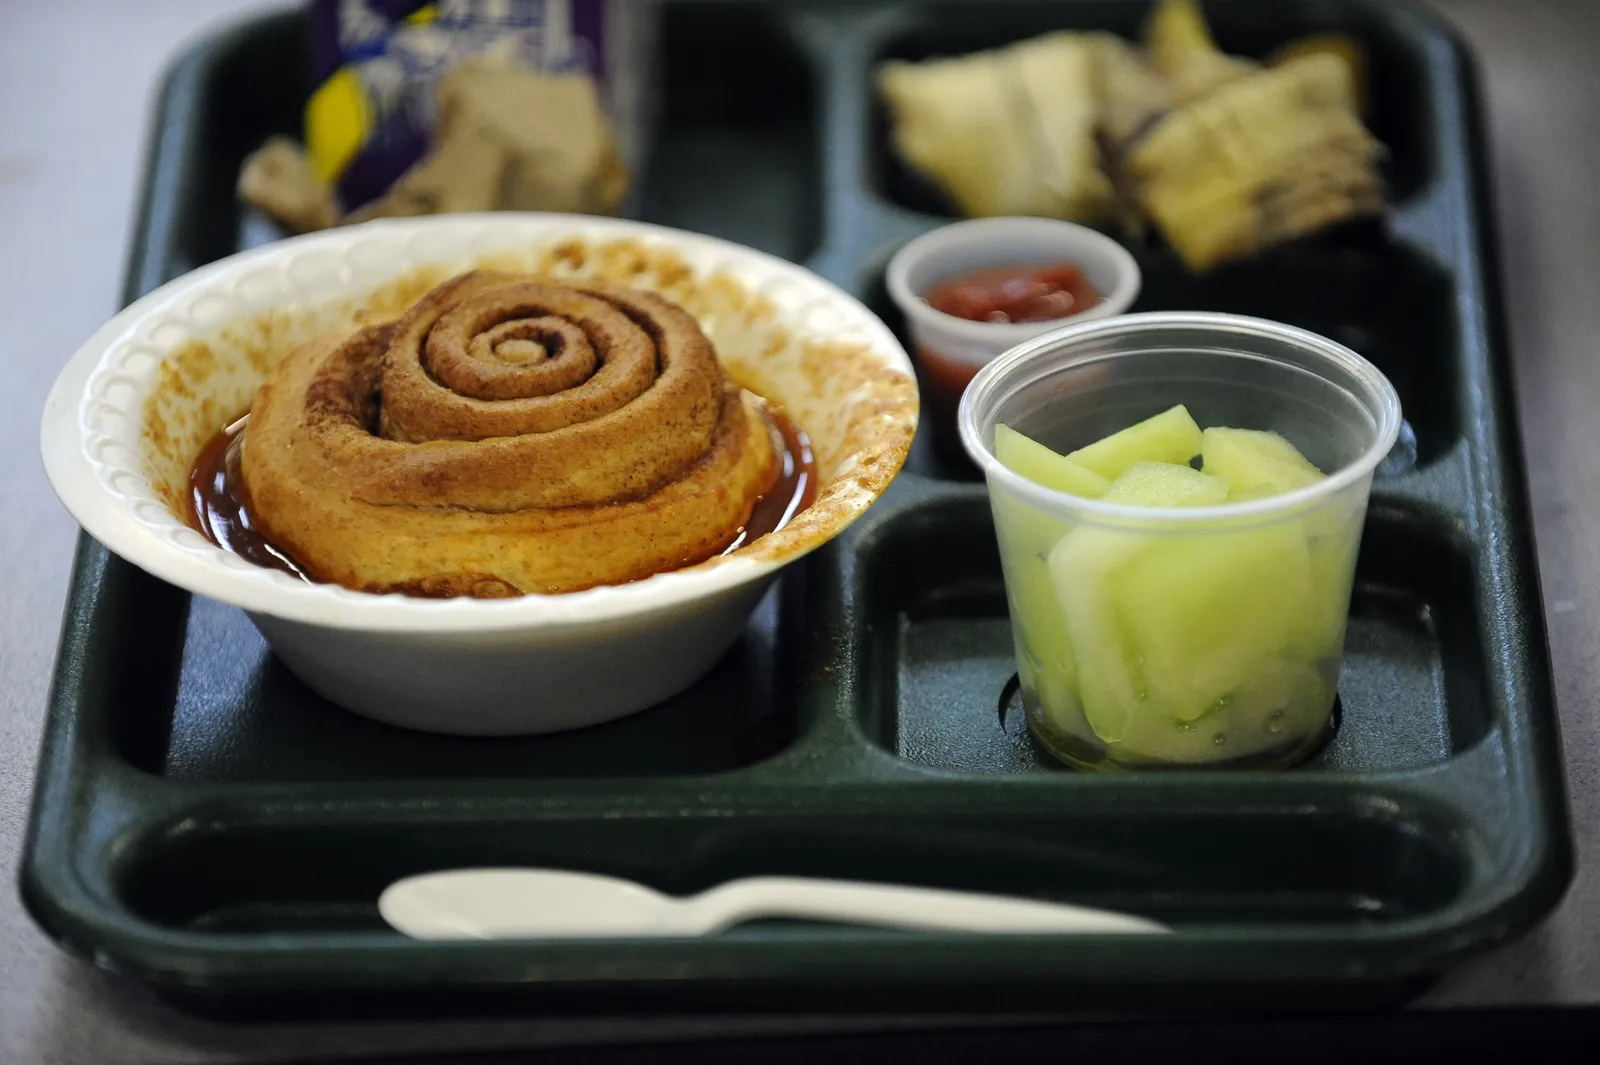 What S Up With The Pairing Of Chili And Cinnamon Rolls Arts Culture Smithsonian Magazine